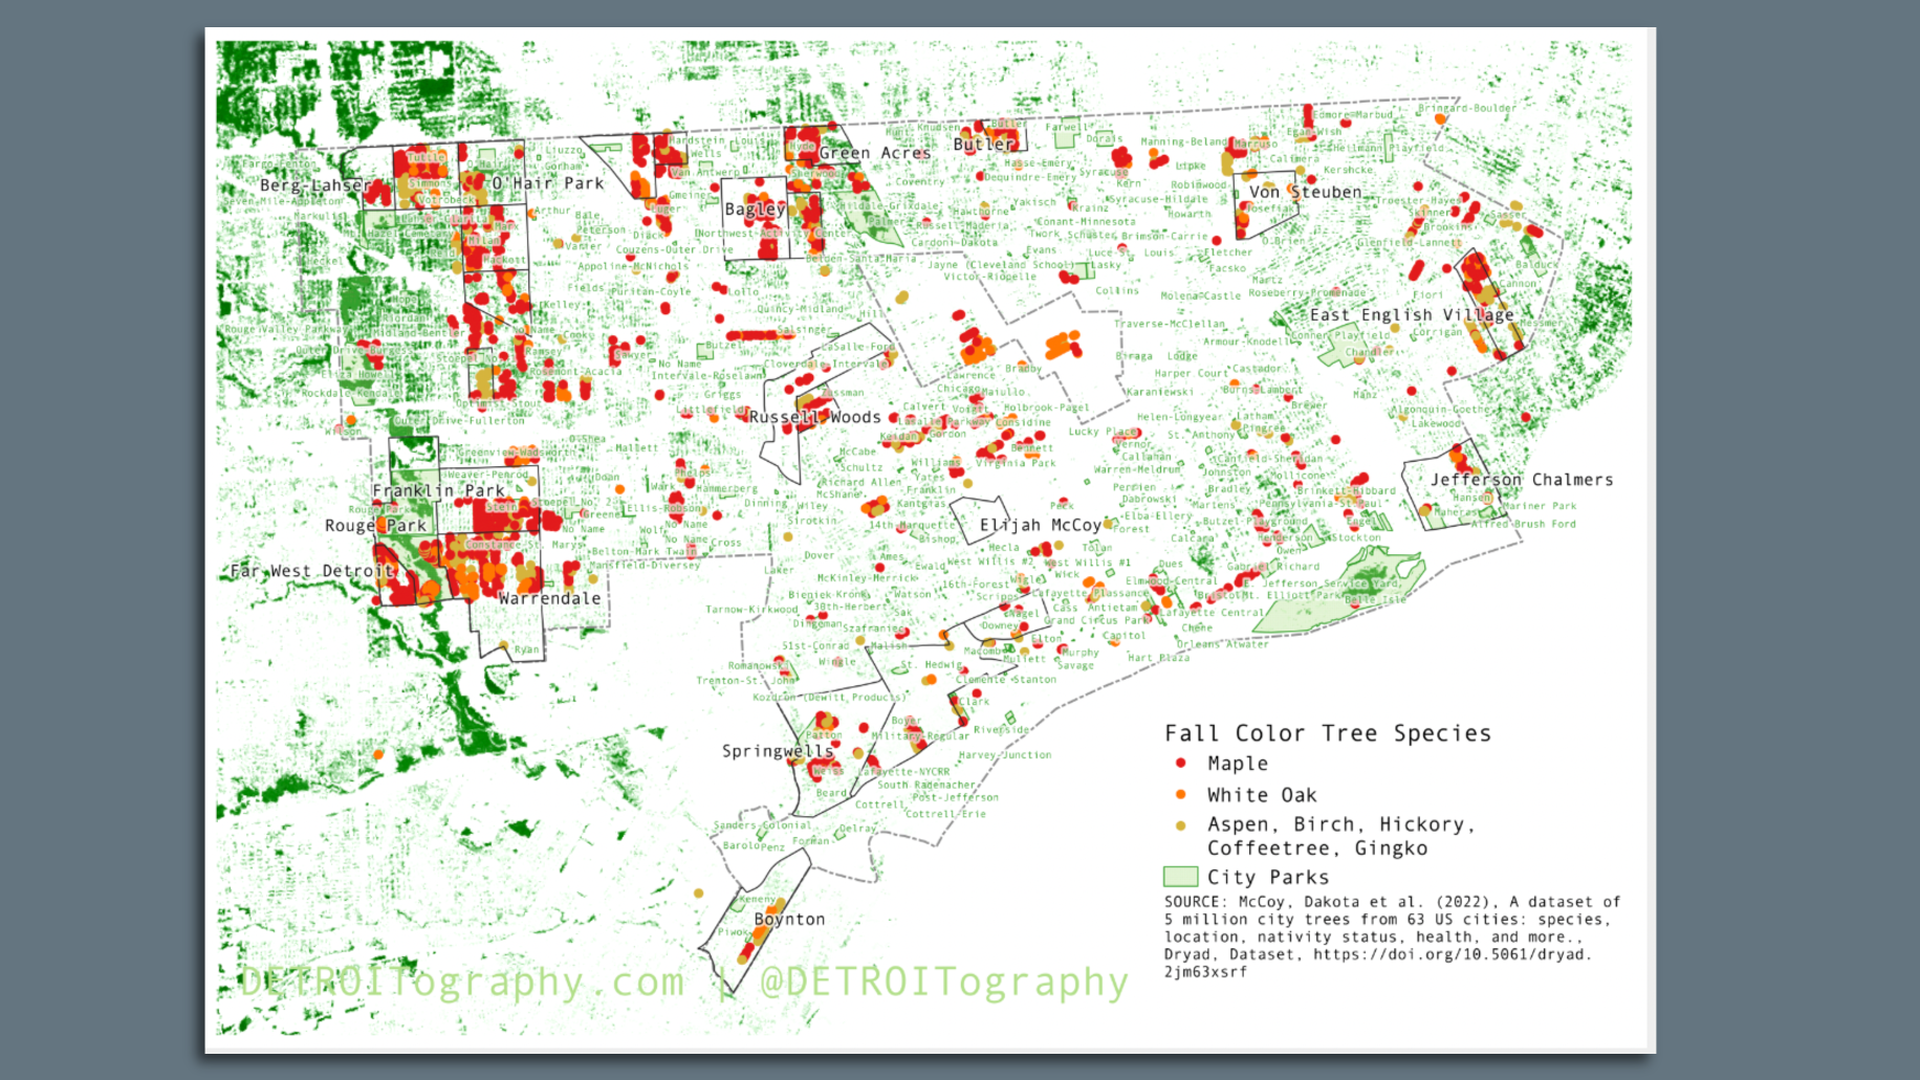 Detroitography map of Detroit's fall colors